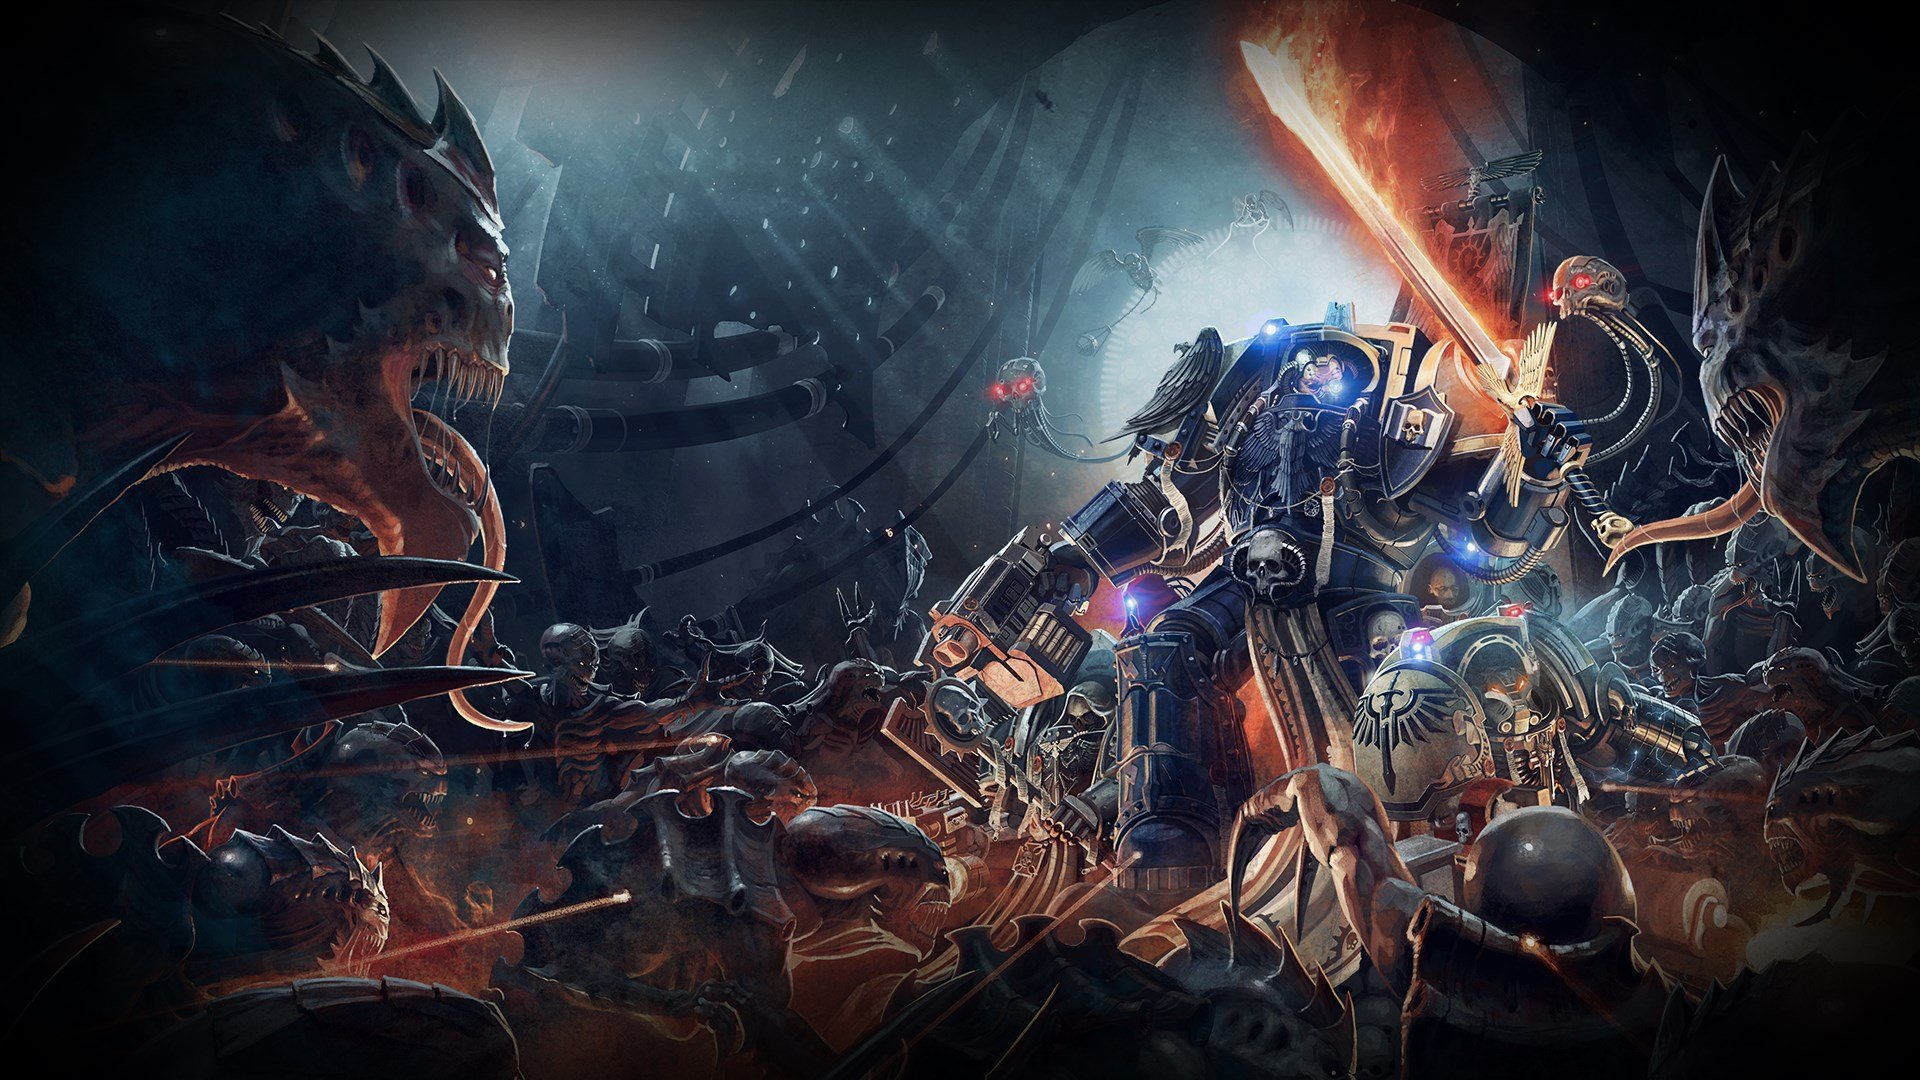 Space Hulk: Deathwing - Windows 10 cover image